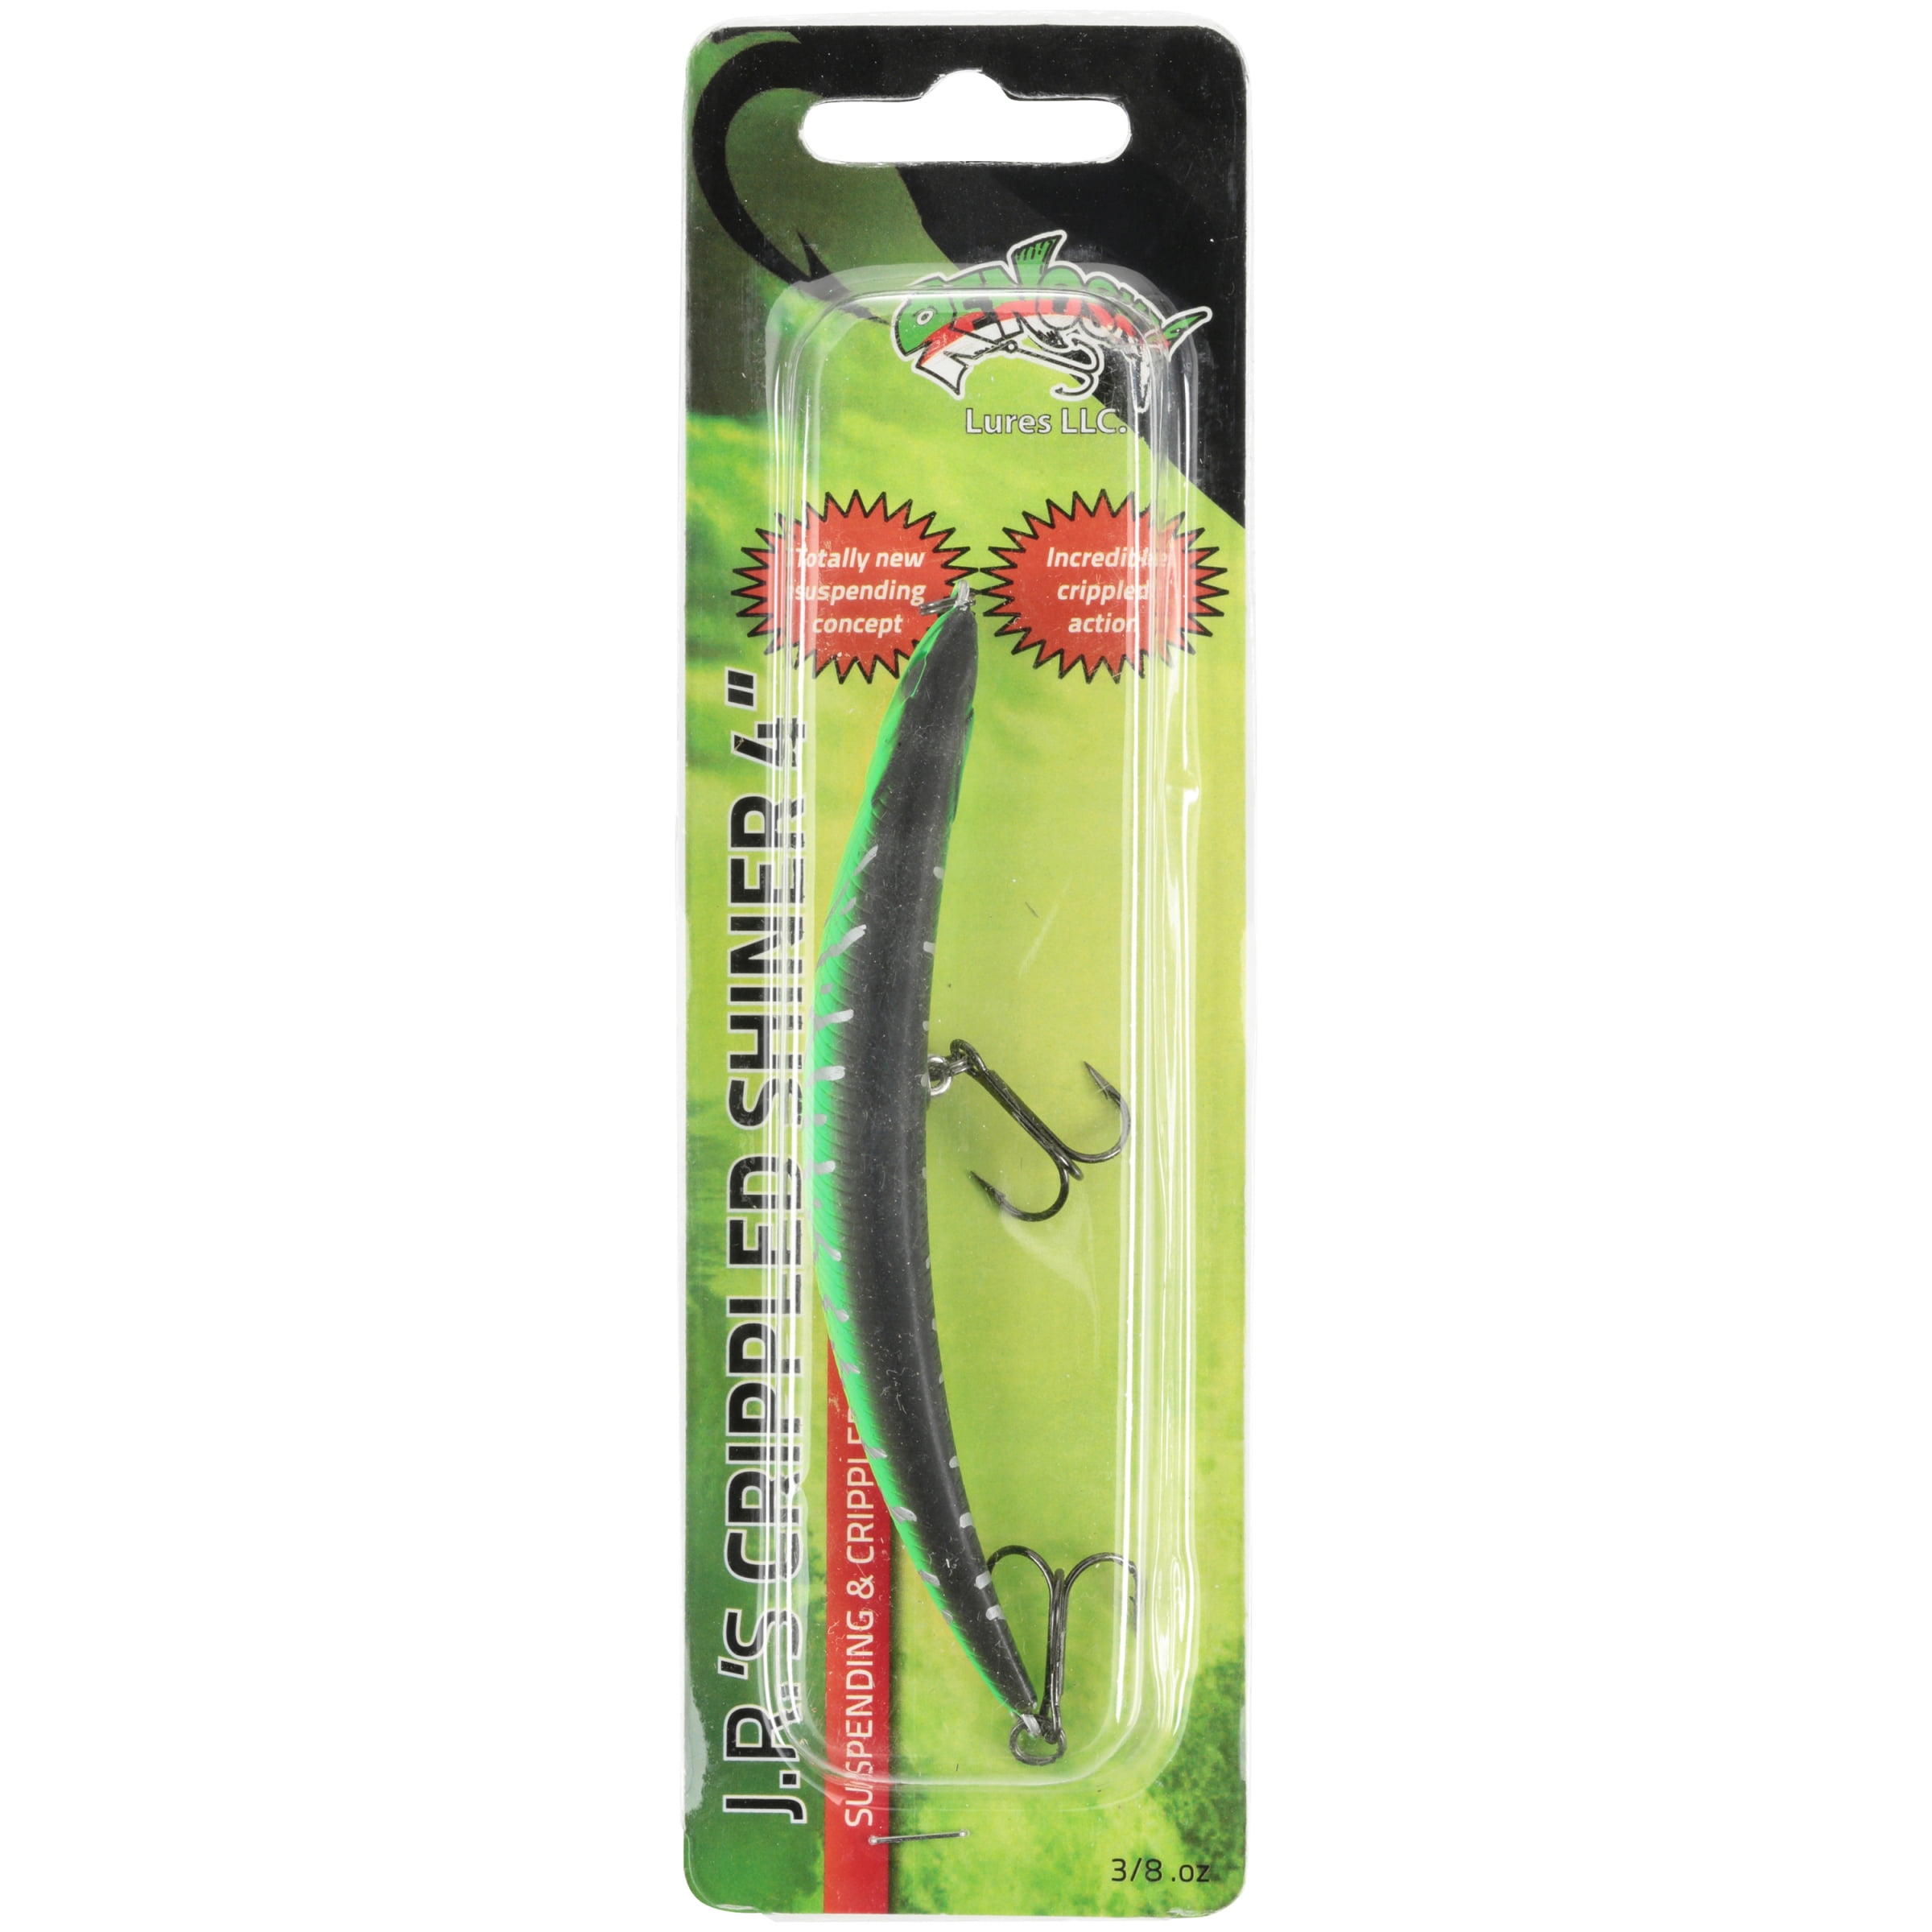 Renosky Lures LLC. J.R.'s Crippled Shiner 4 Fishing Lure Carded Pack 